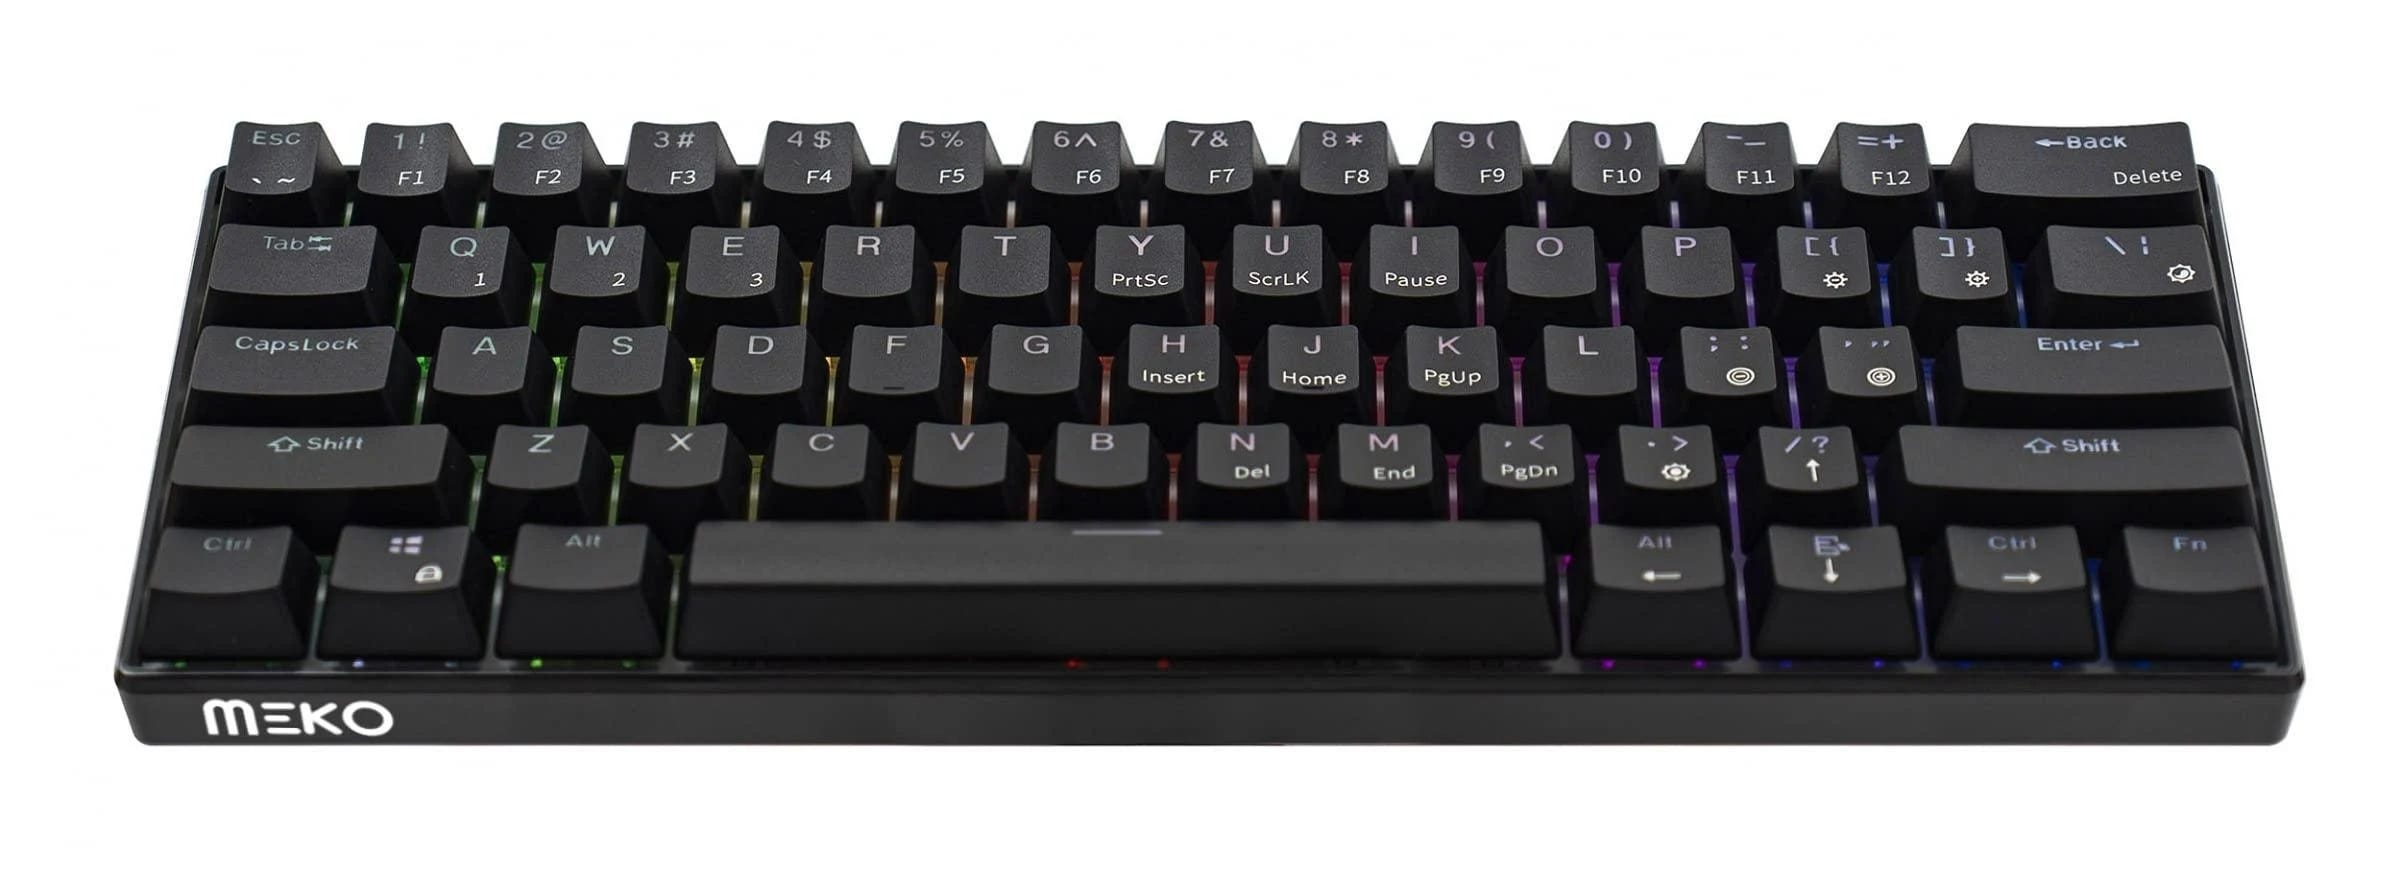 Stylish MEKO 60% RGB LED Blink Keyboard with Hotswap, Bluetooth, and Kailh Box Brown Caps | Image